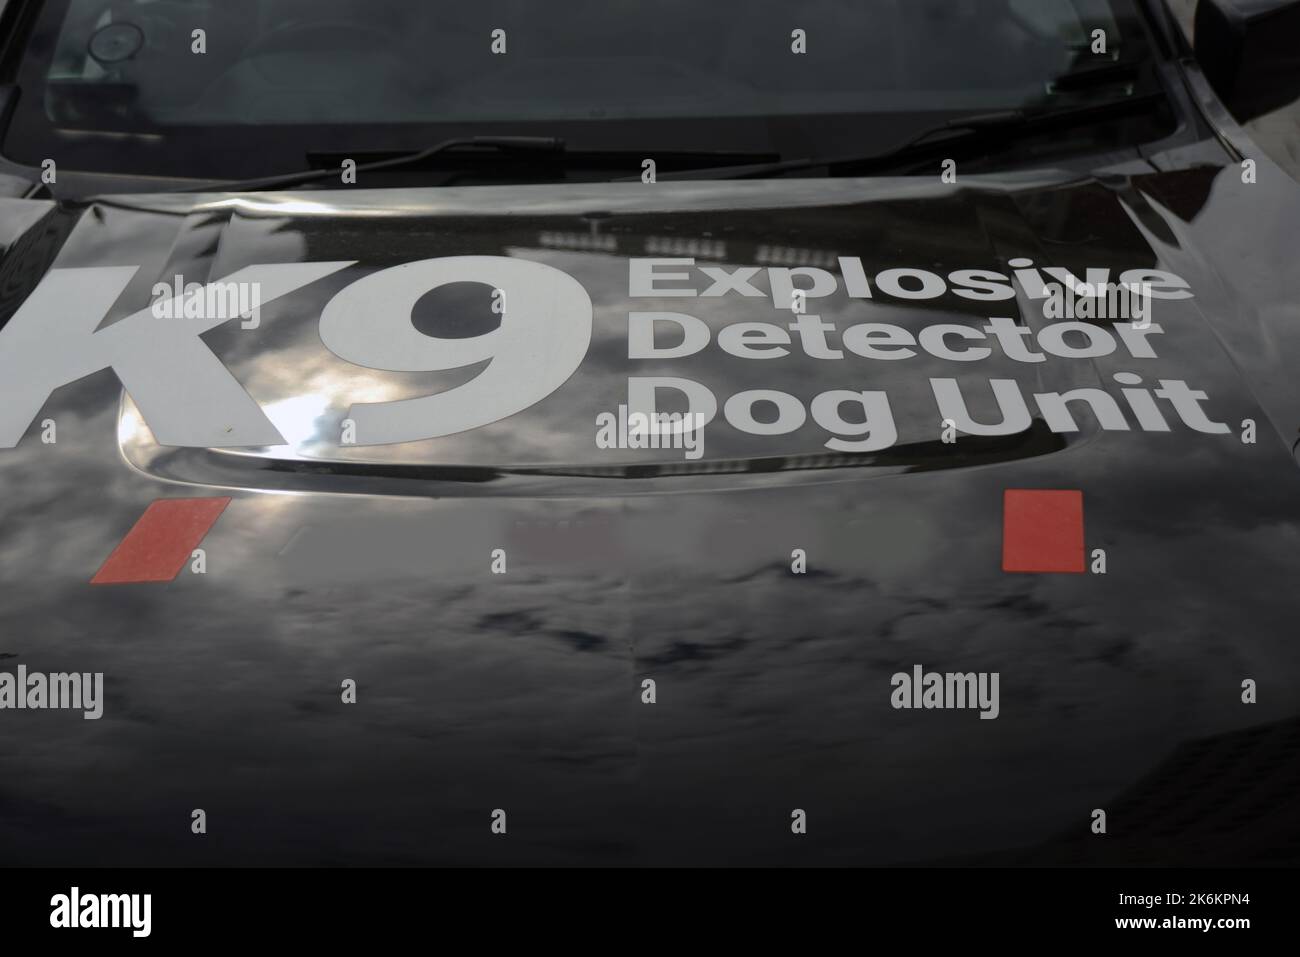 signage for K9 explosive detector dog unit on the bonnet of a car Stock Photo